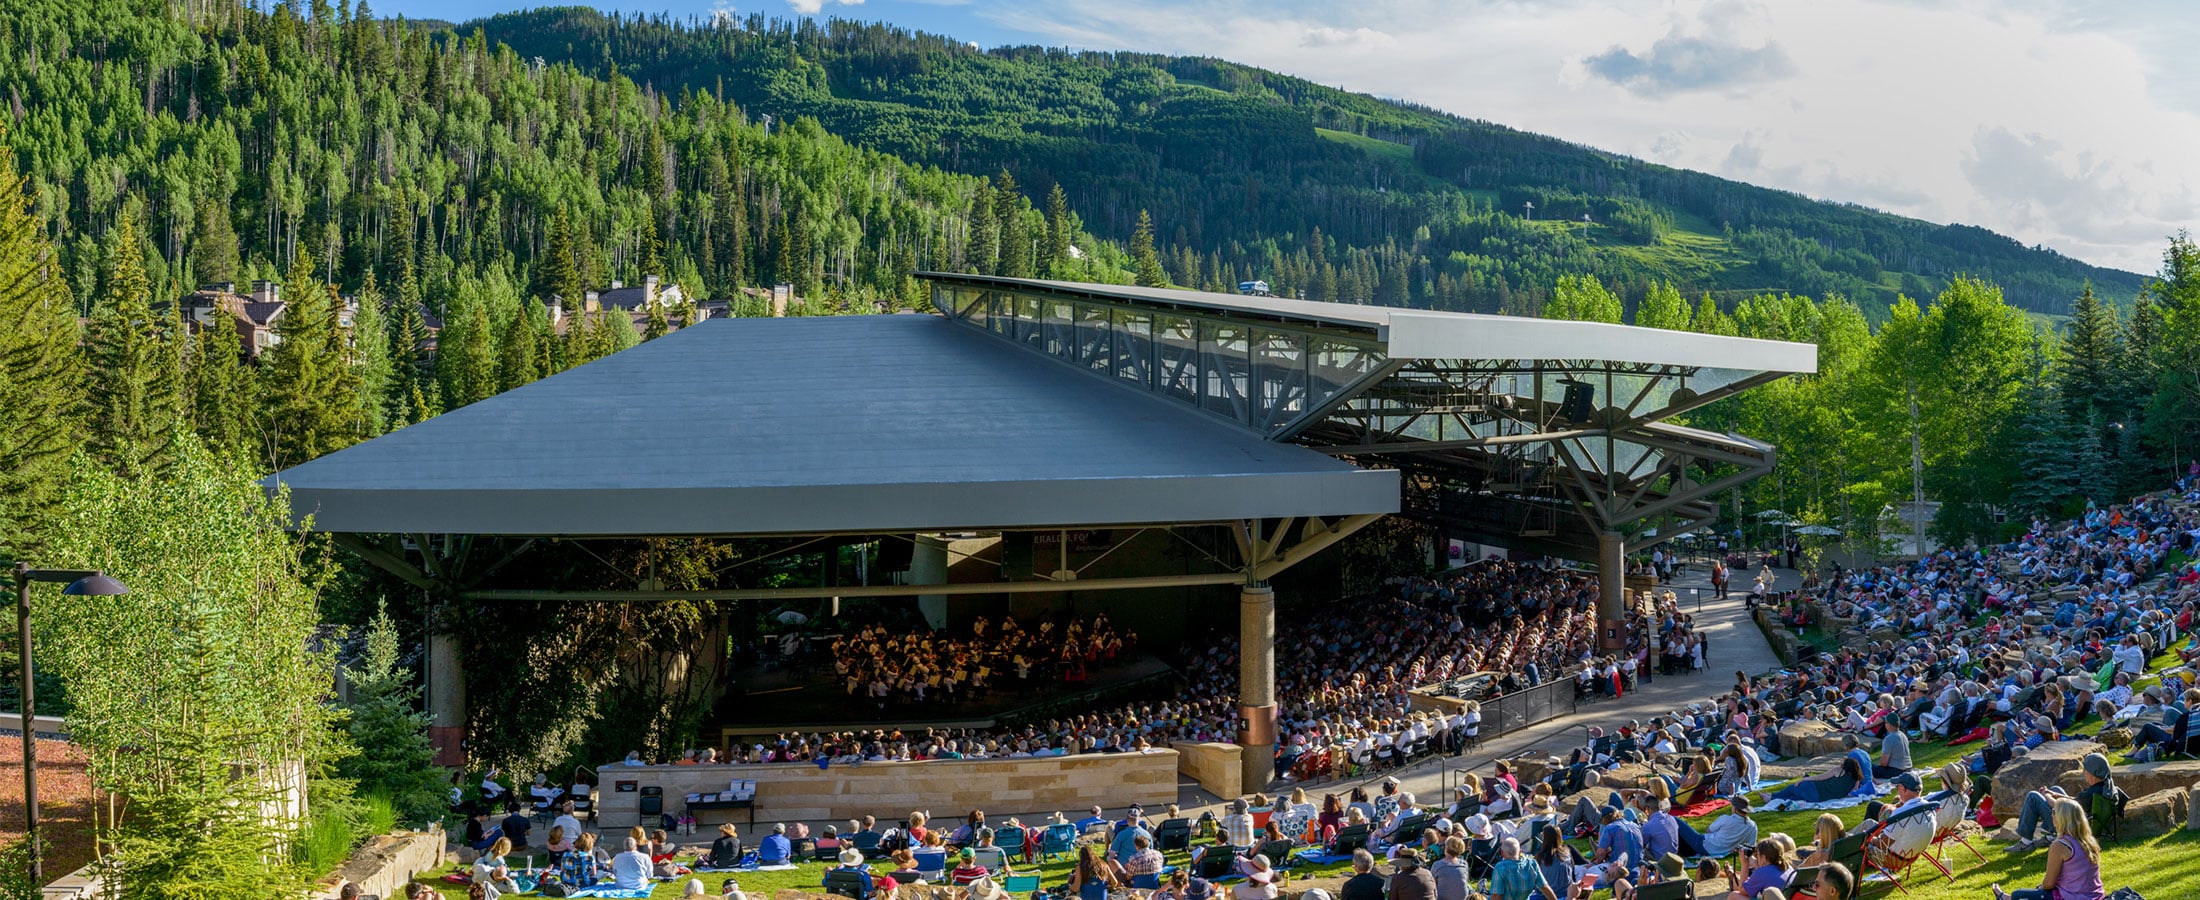 Event attendees sit on blankets under a clear, blue sky and watch a performance at The Amp, an outdoor amphitheater in Vail. Evergreens stand on the rolling mountainside behind it.